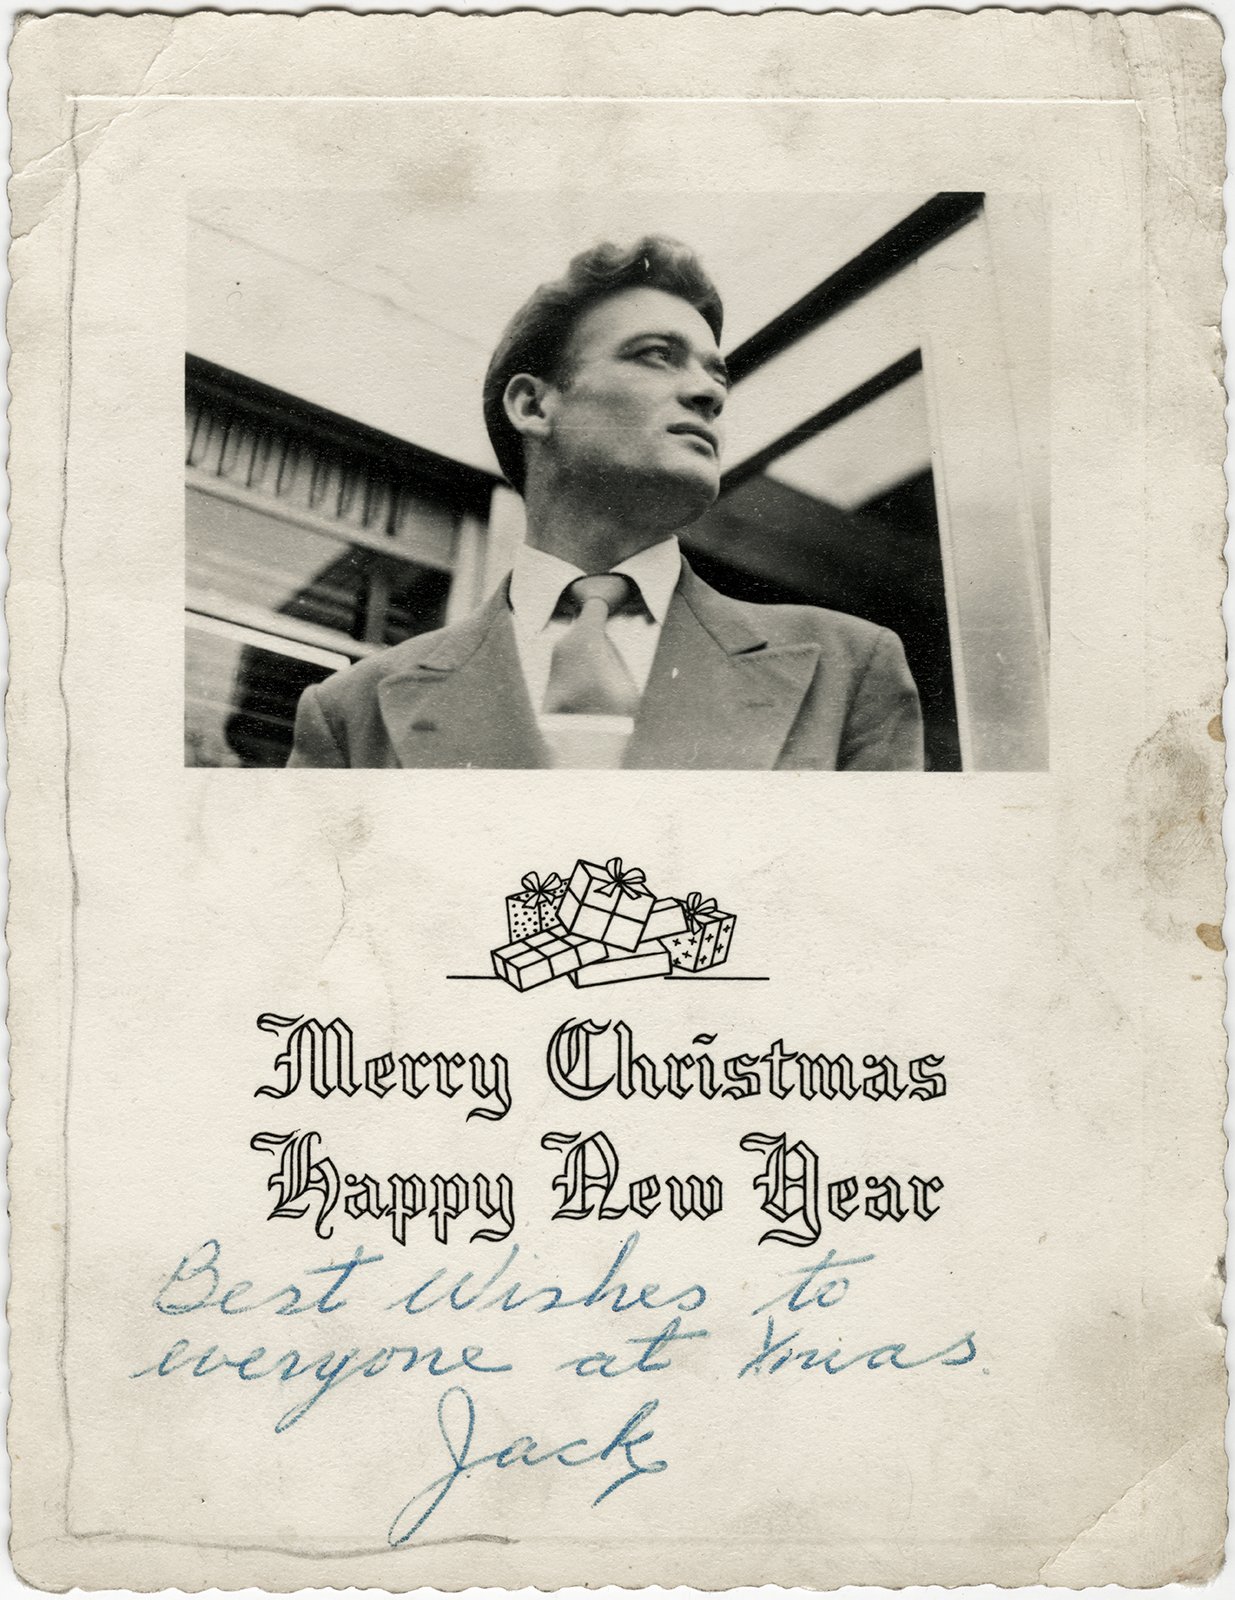 Holiday/Christmas card sent by Jack Fields from the United States to Ireland, c. 1960s